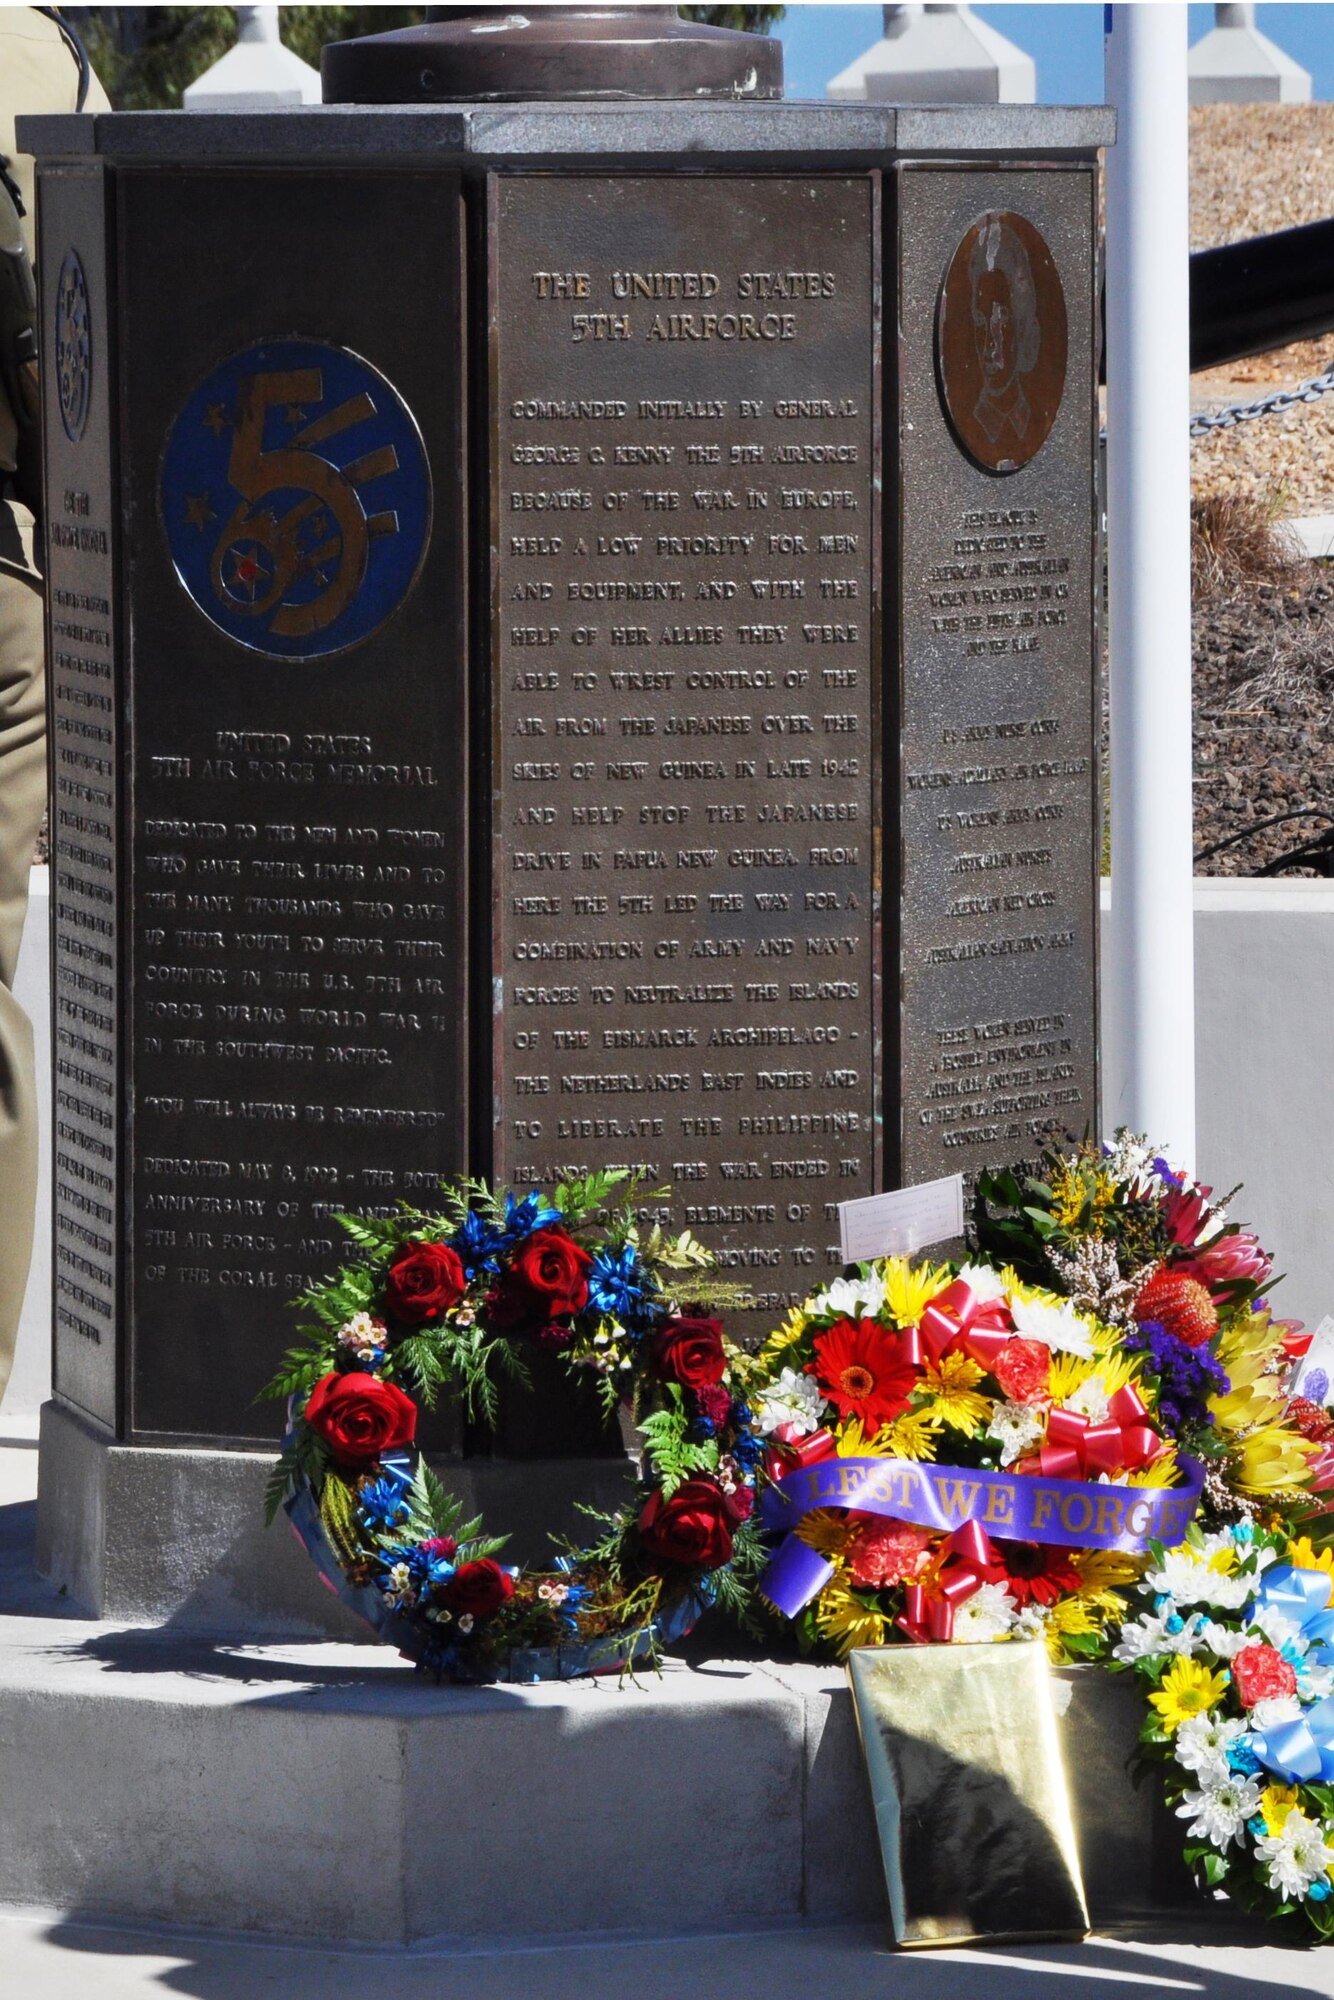 Wreaths and mementos placed at the base of the 5th Air Force Memorial during a memorial service, Aug. 16, 2015, reflect the honor and respect shown towards the men and women who served in the command during World War II. The 5th Air Force Memorial at Kissing Point, Townsville, Australia, was erected to honor and remember the men and women who gave their lives and to the many thousands who gave up their youth to serve their country in 5th Air Force during WW II. (U.S. Air Force photo by Capt. George M. Tobias/Released)